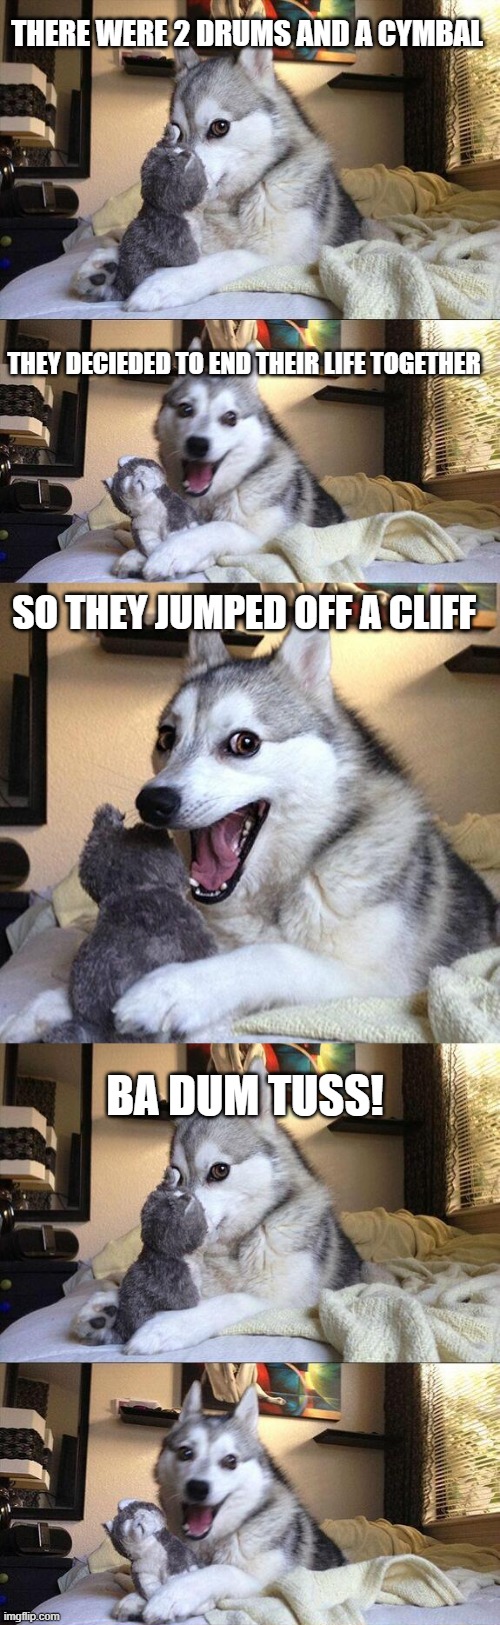 a joke as ancient as dinosaurs. | THERE WERE 2 DRUMS AND A CYMBAL; THEY DECIEDED TO END THEIR LIFE TOGETHER; SO THEY JUMPED OFF A CLIFF; BA DUM TUSS! | image tagged in memes,bad pun dog | made w/ Imgflip meme maker